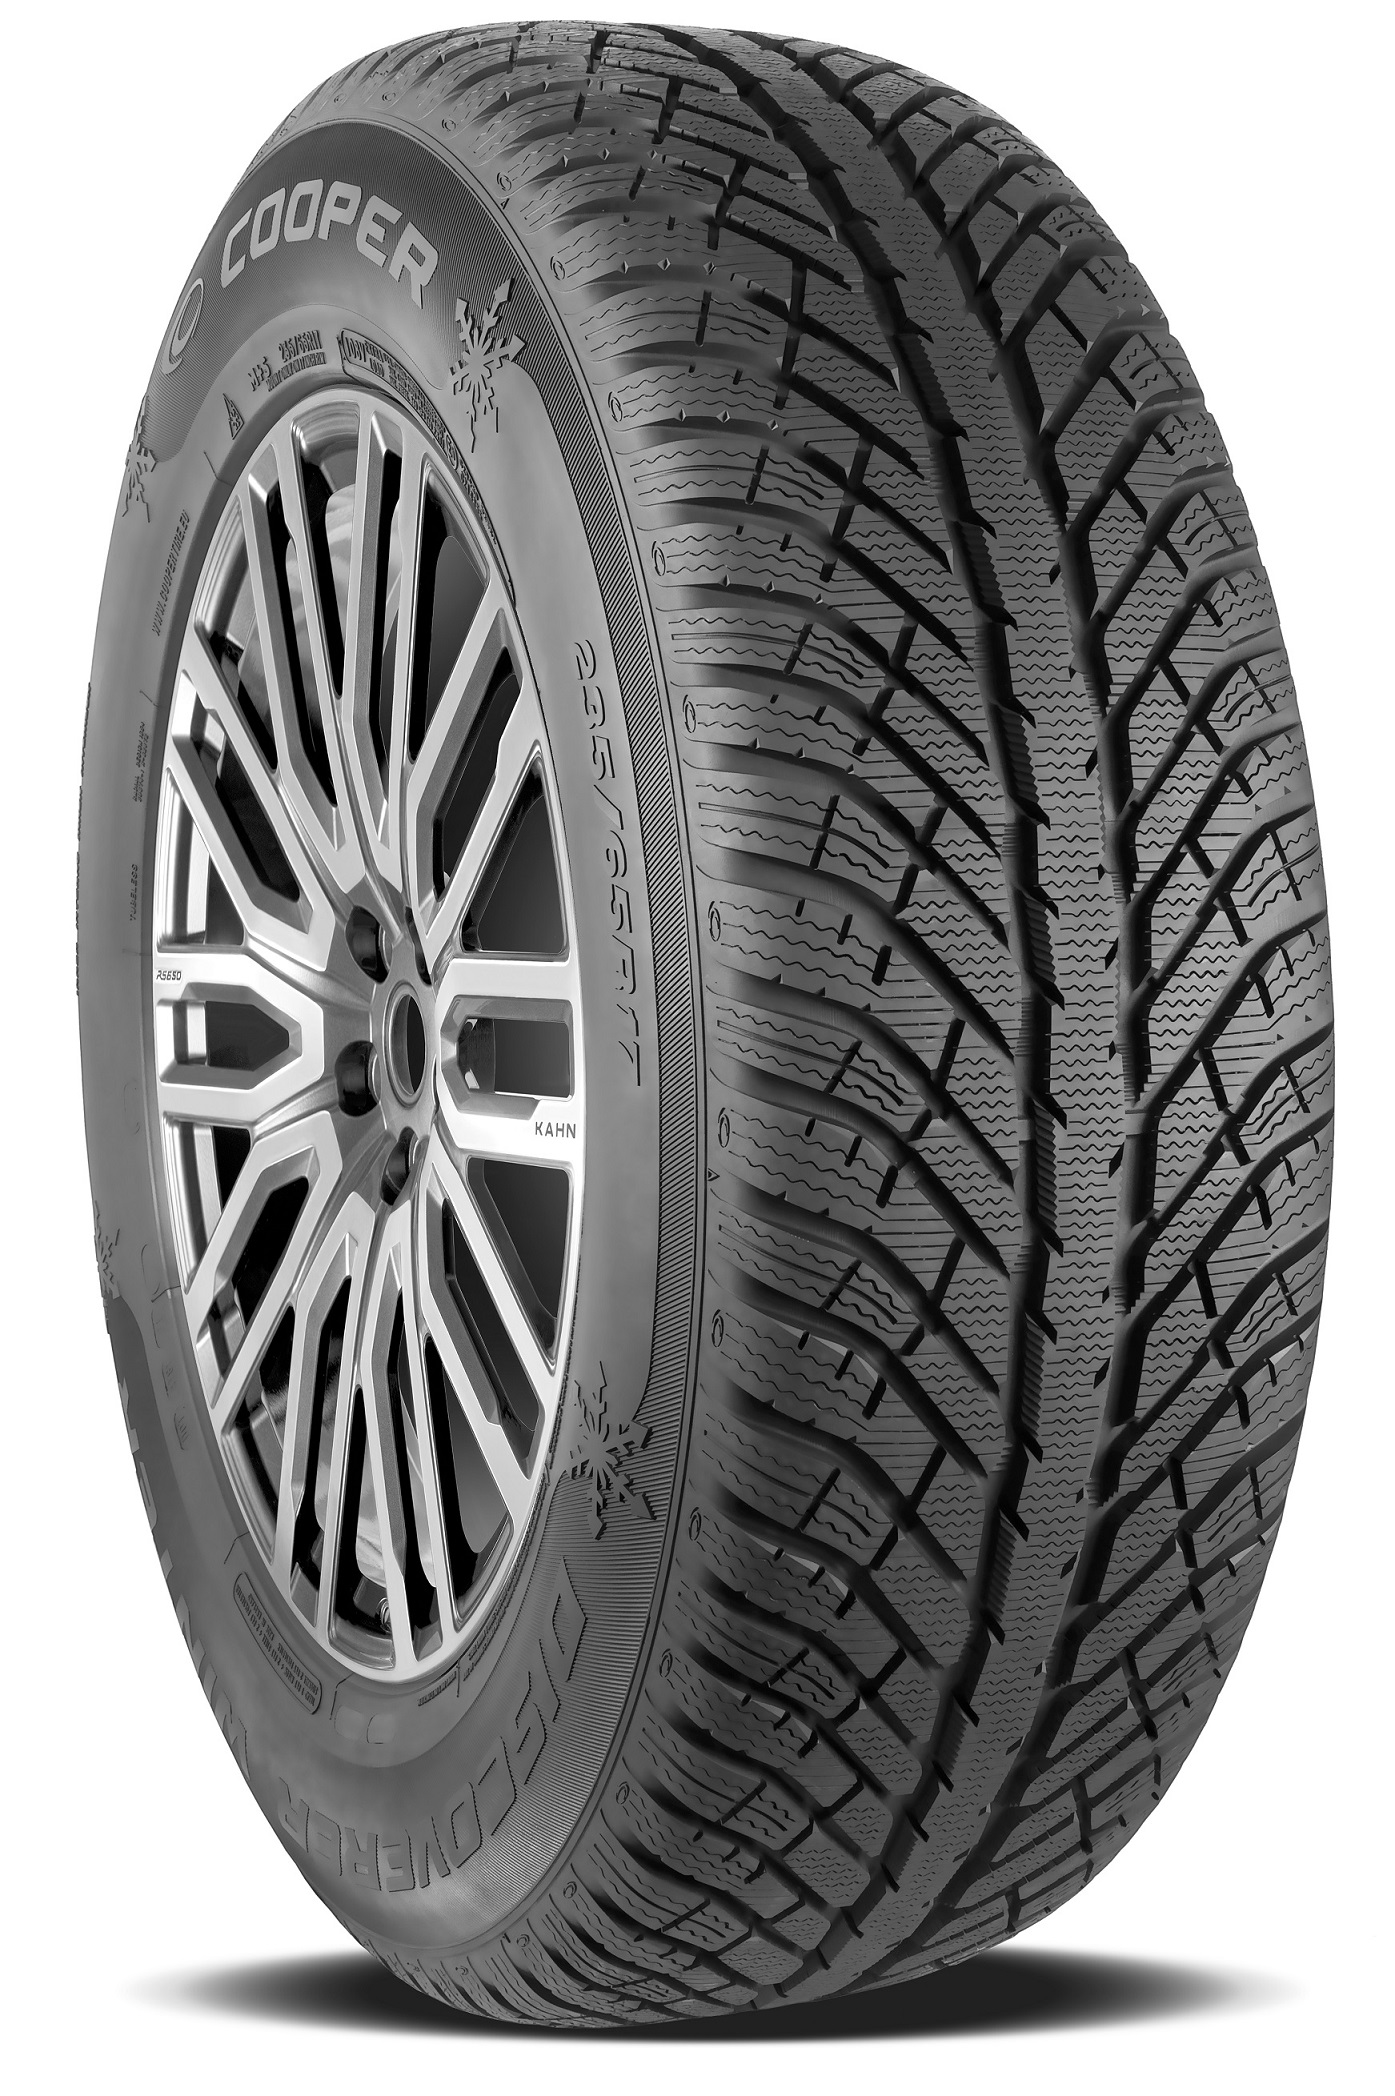 Gomme Nuove Cooper Tyres 215/50 R18 92V DISCOVER WINTER pneumatici nuovi Invernale